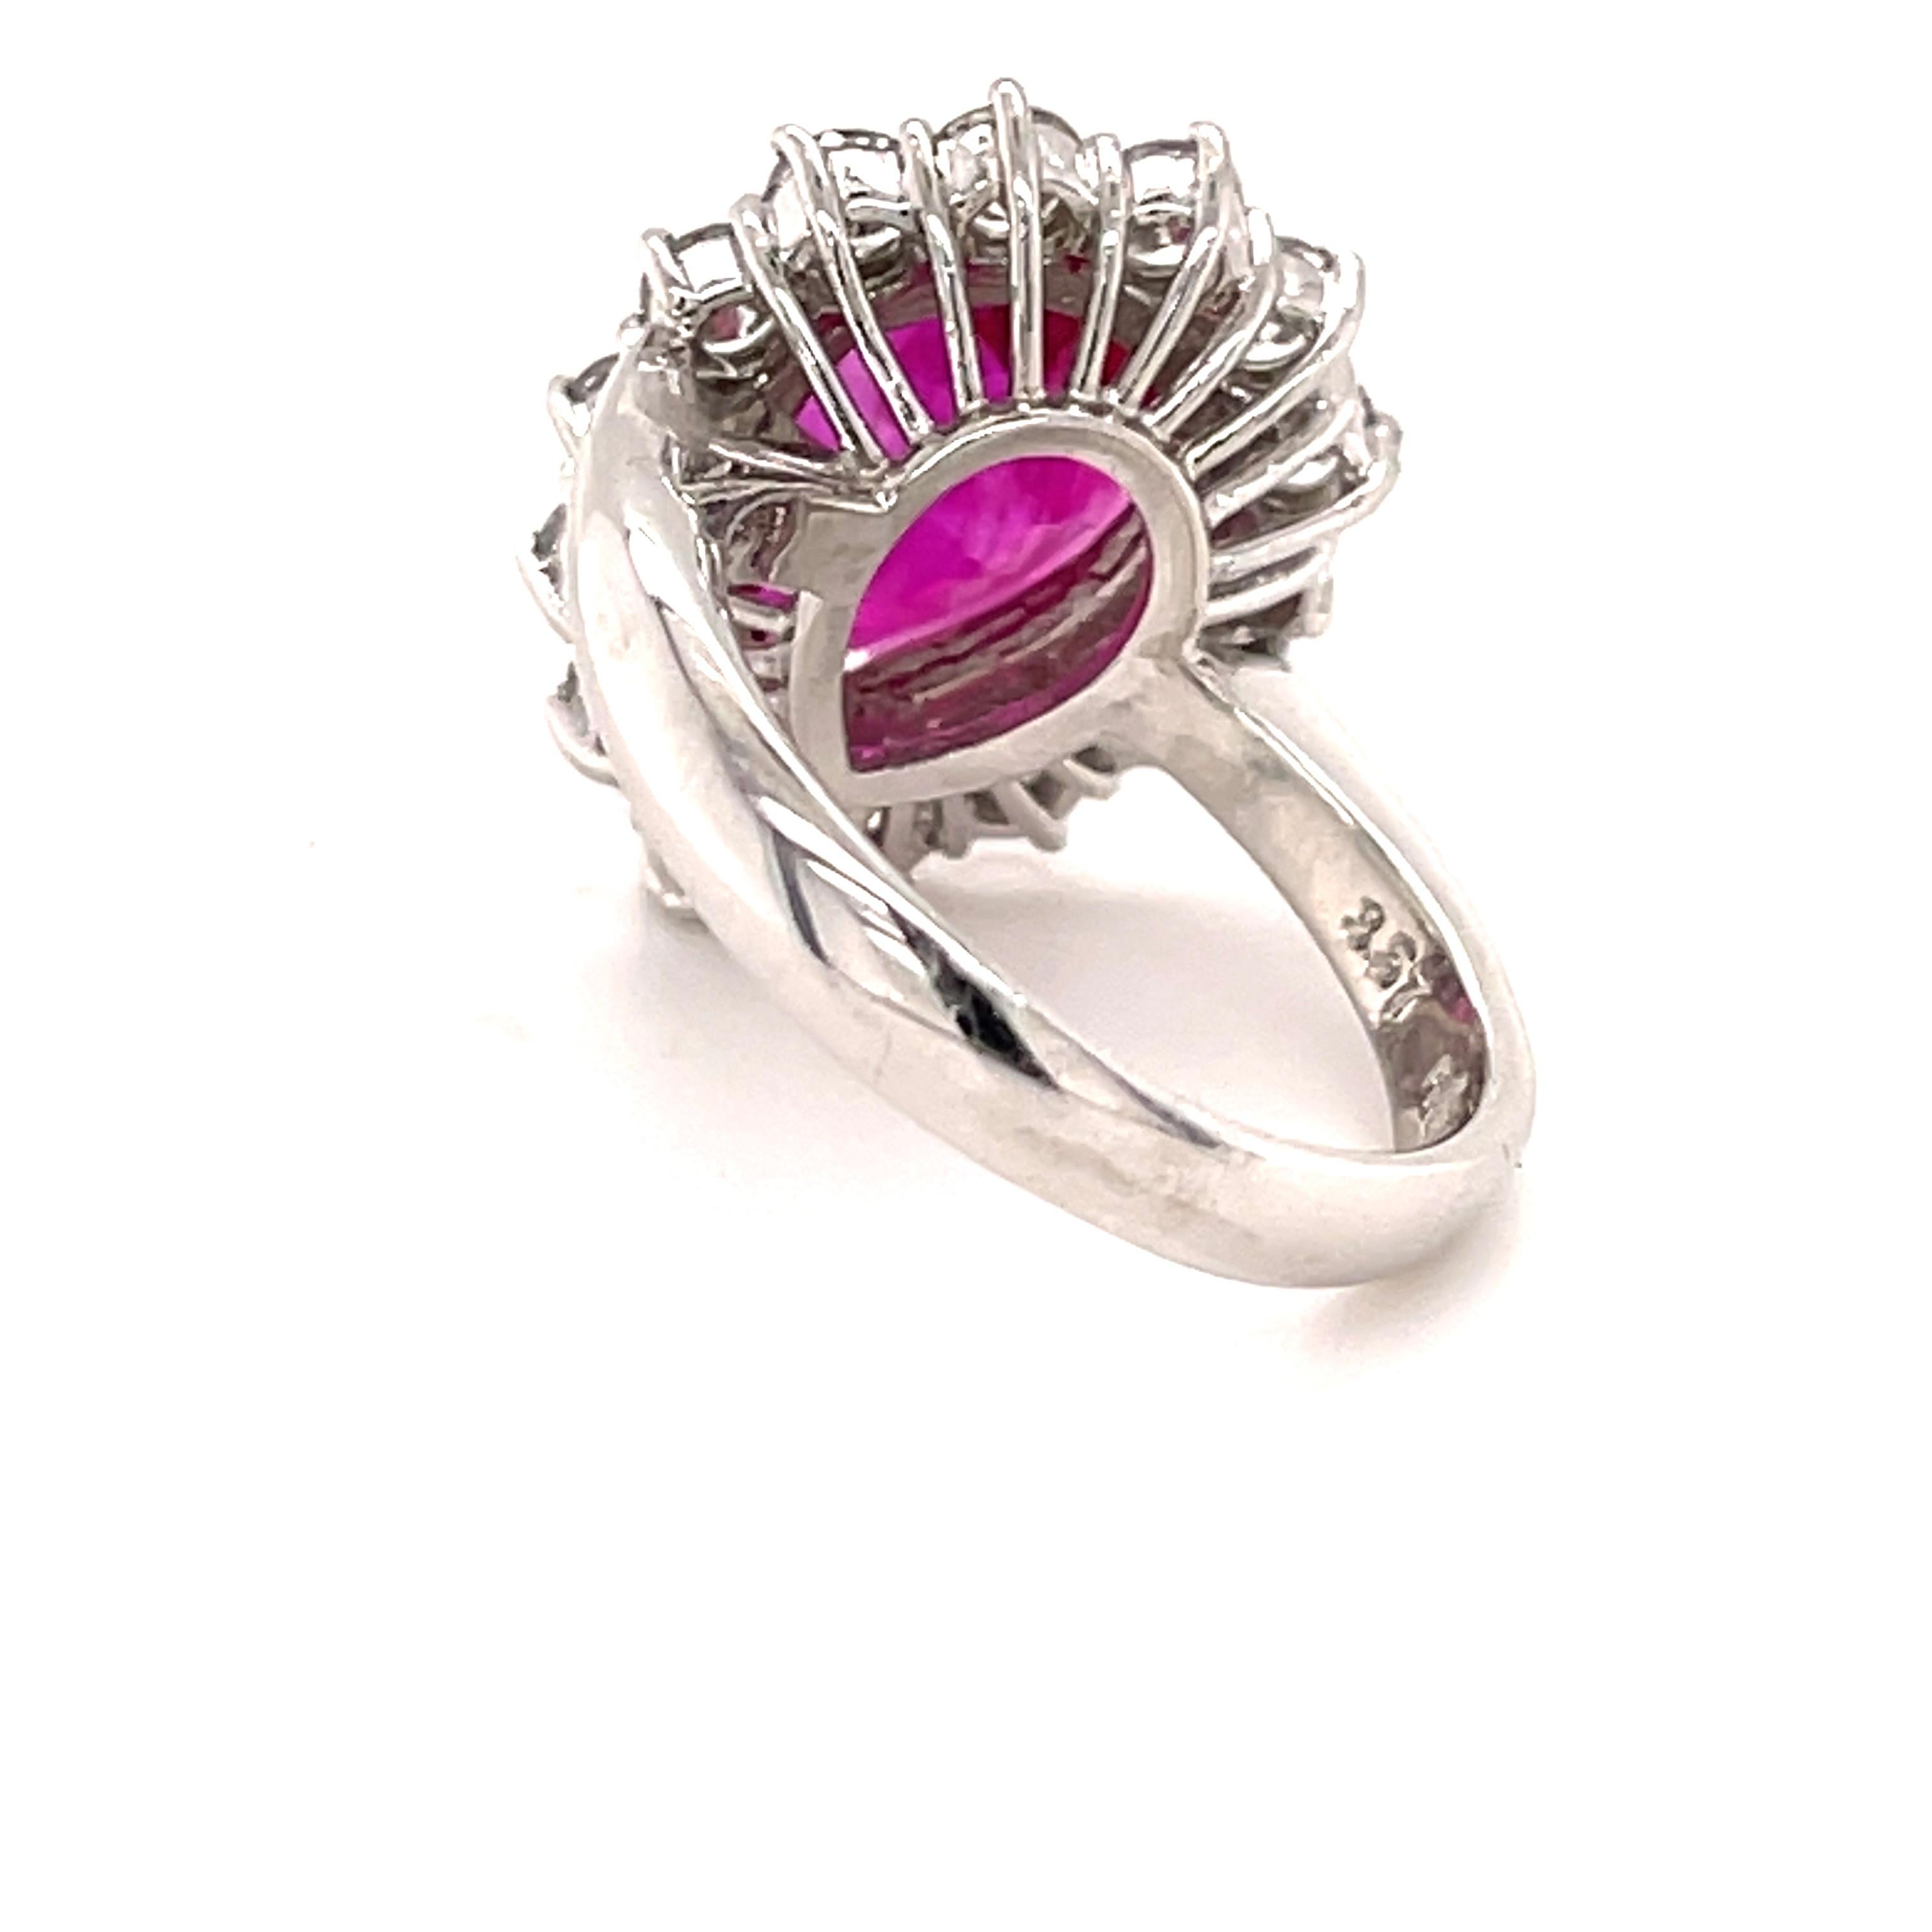 This classic cocktail ring has a 3.57 carats purplish-red pear shape natural Ruby as a center-stone, with measurements of 11.67 x 9.61 x 4.47 and a report from the Gemological Insitute of America (GIA) Number 2183800291 showing that the stone has an